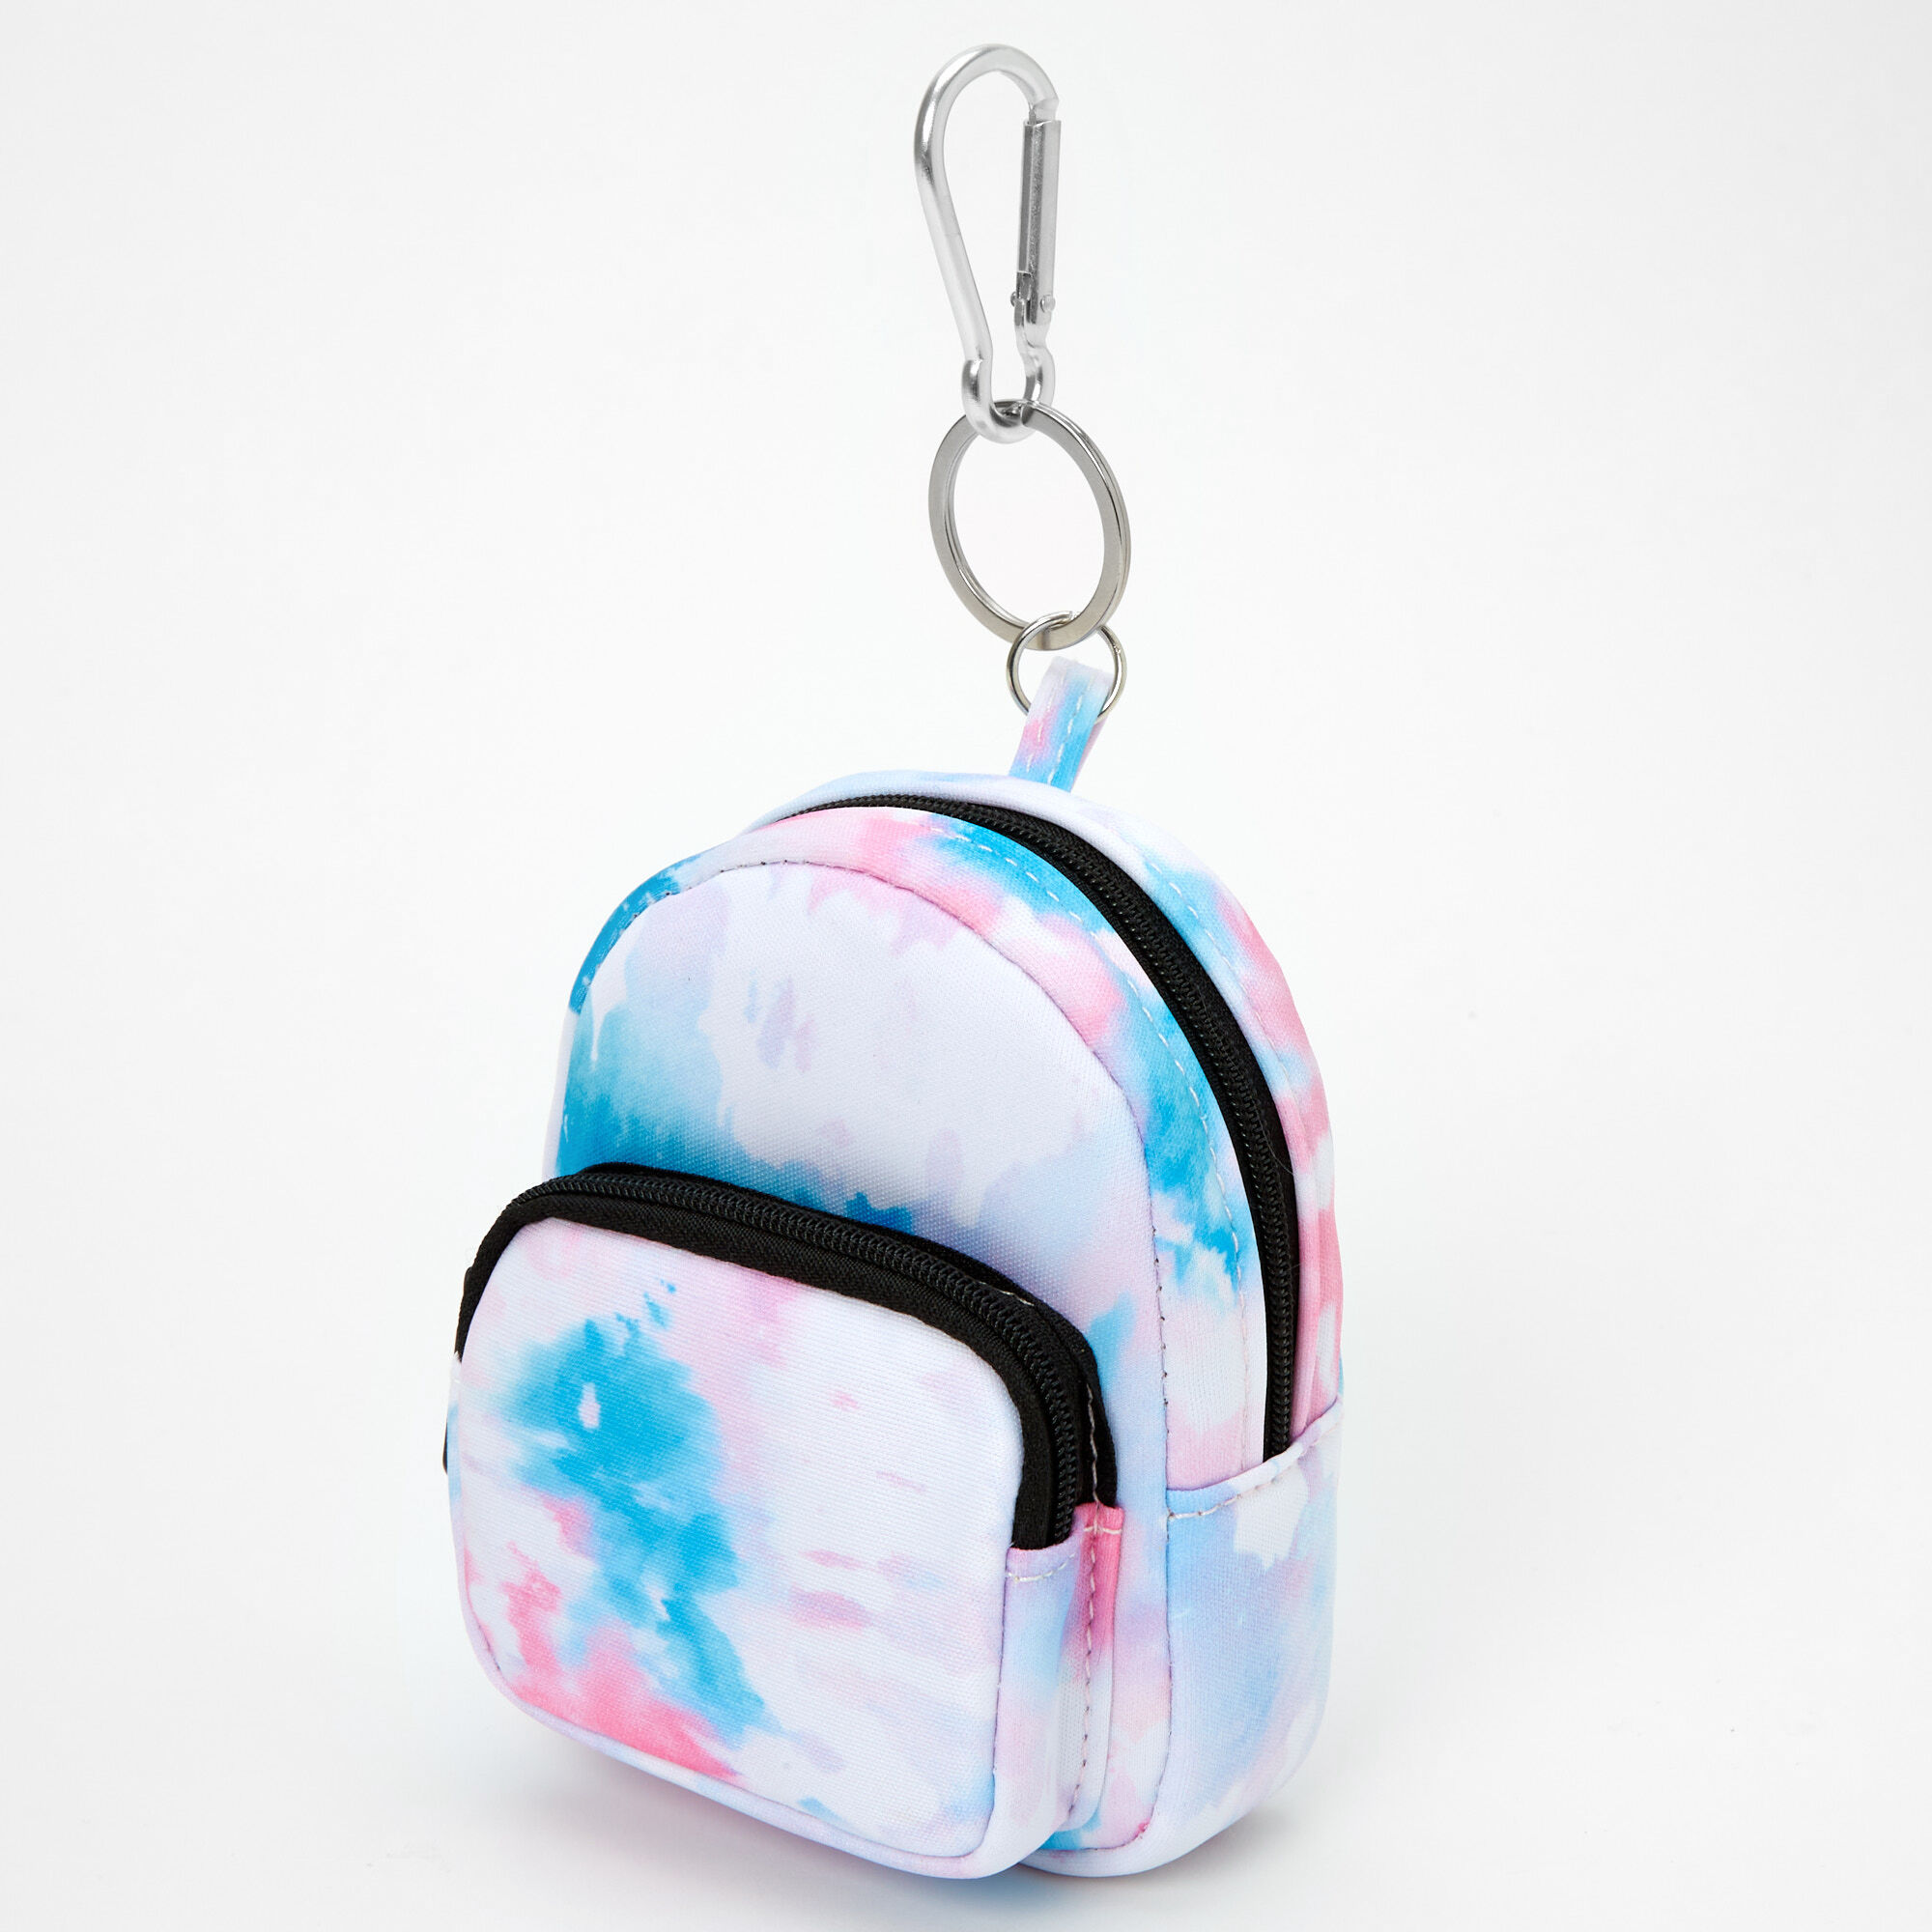 View Claires Pastel Tie Dye Mini Backpack Keyring Pinkblue information